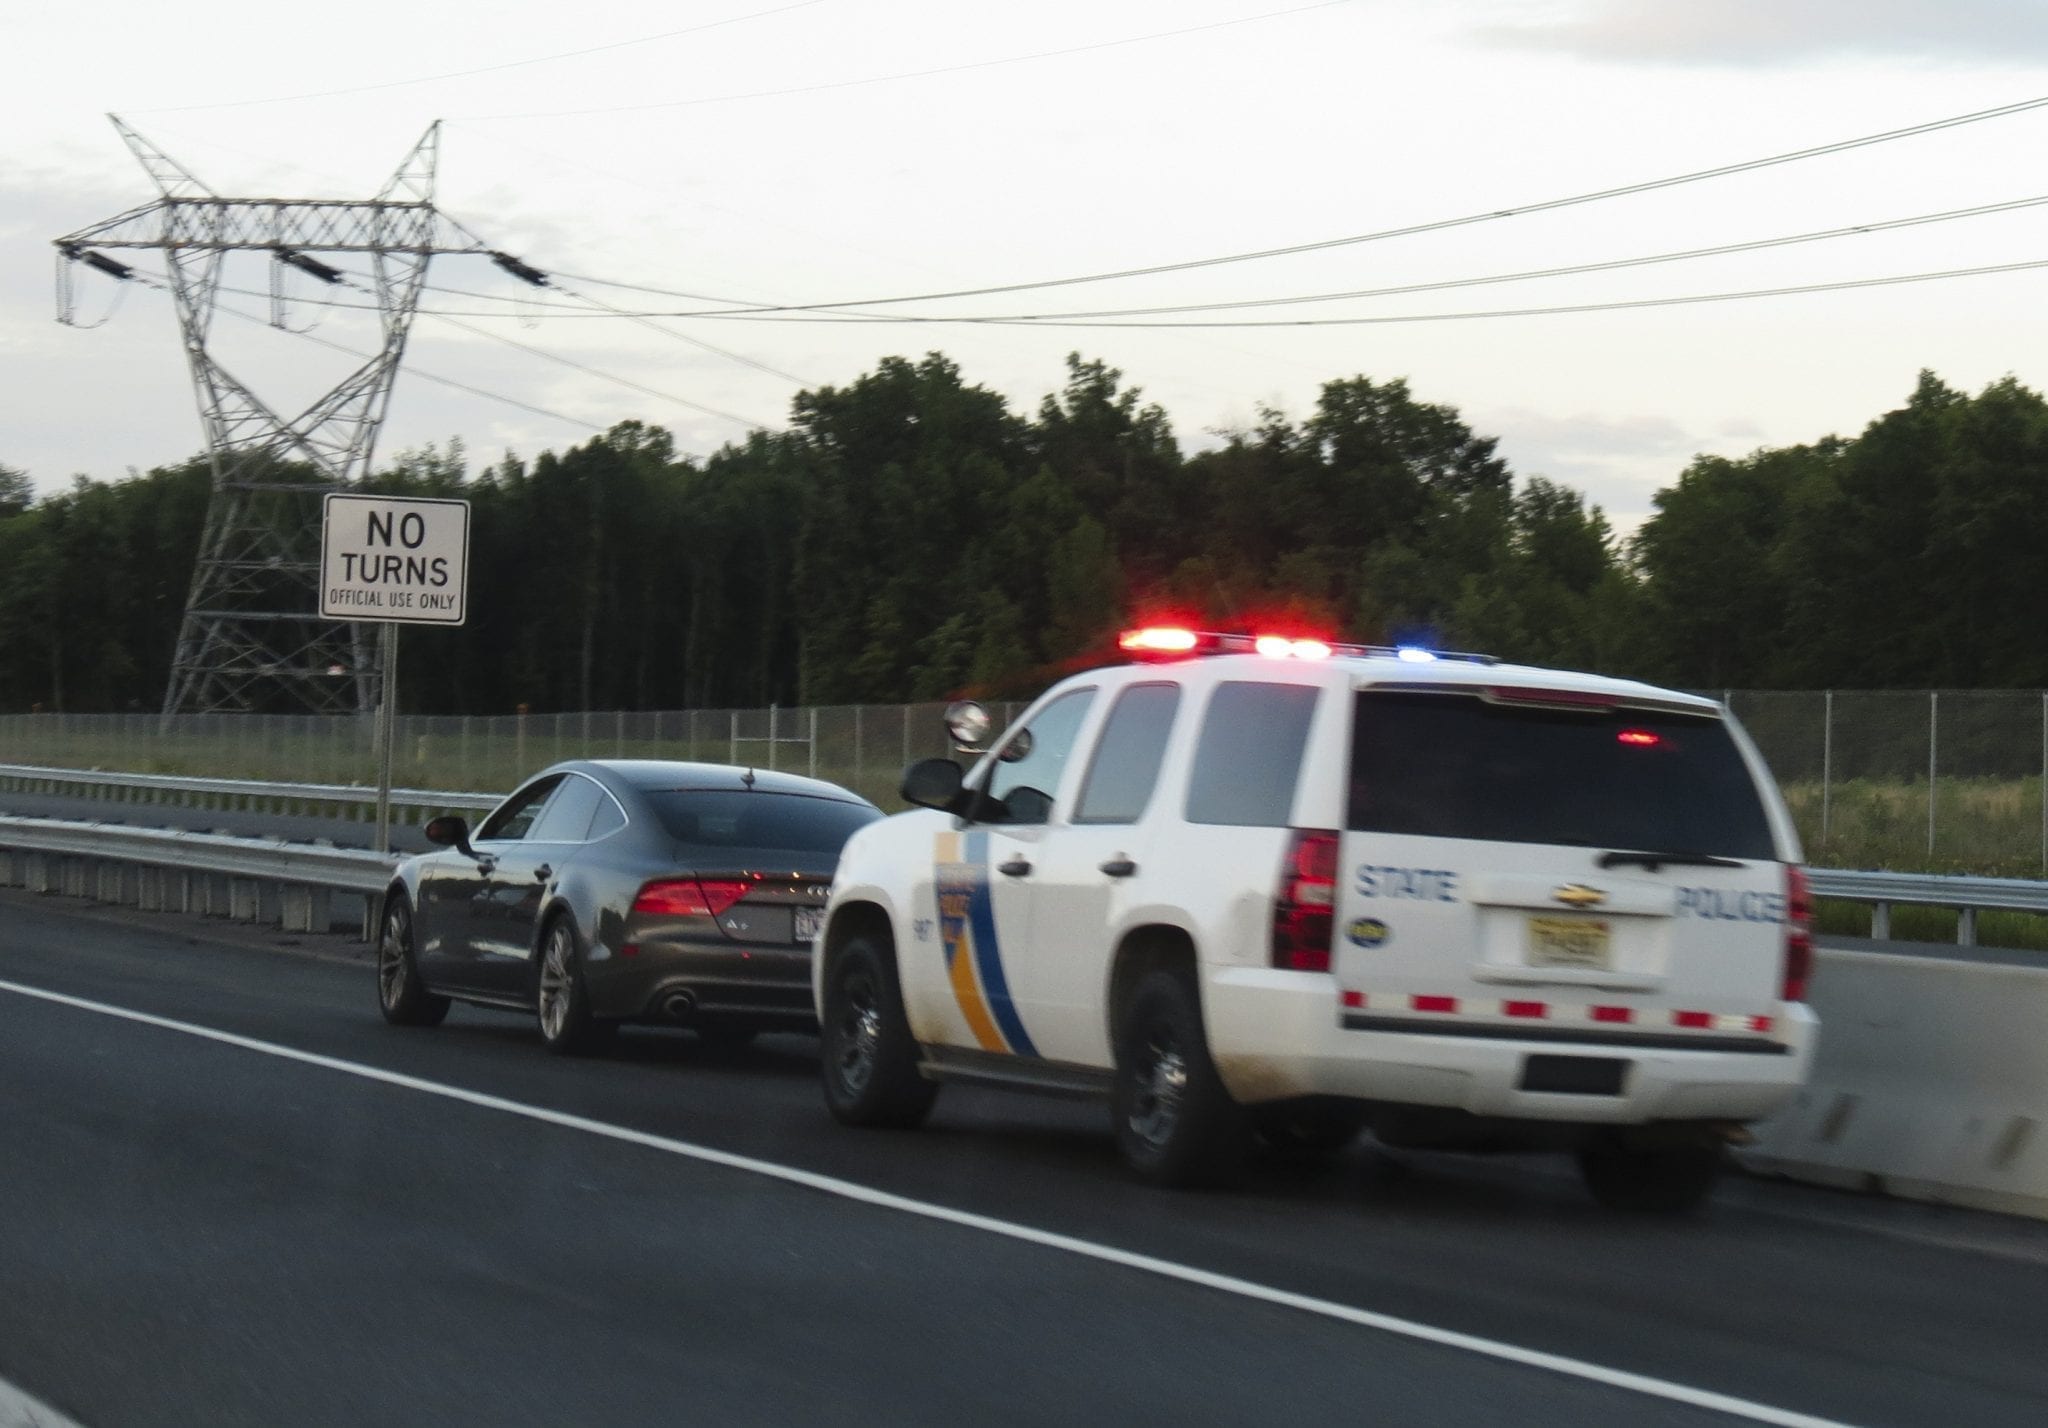 Traffic stop; image by versageek, CC BY-SA 2.0, no changes, via Wikimedia Commons.